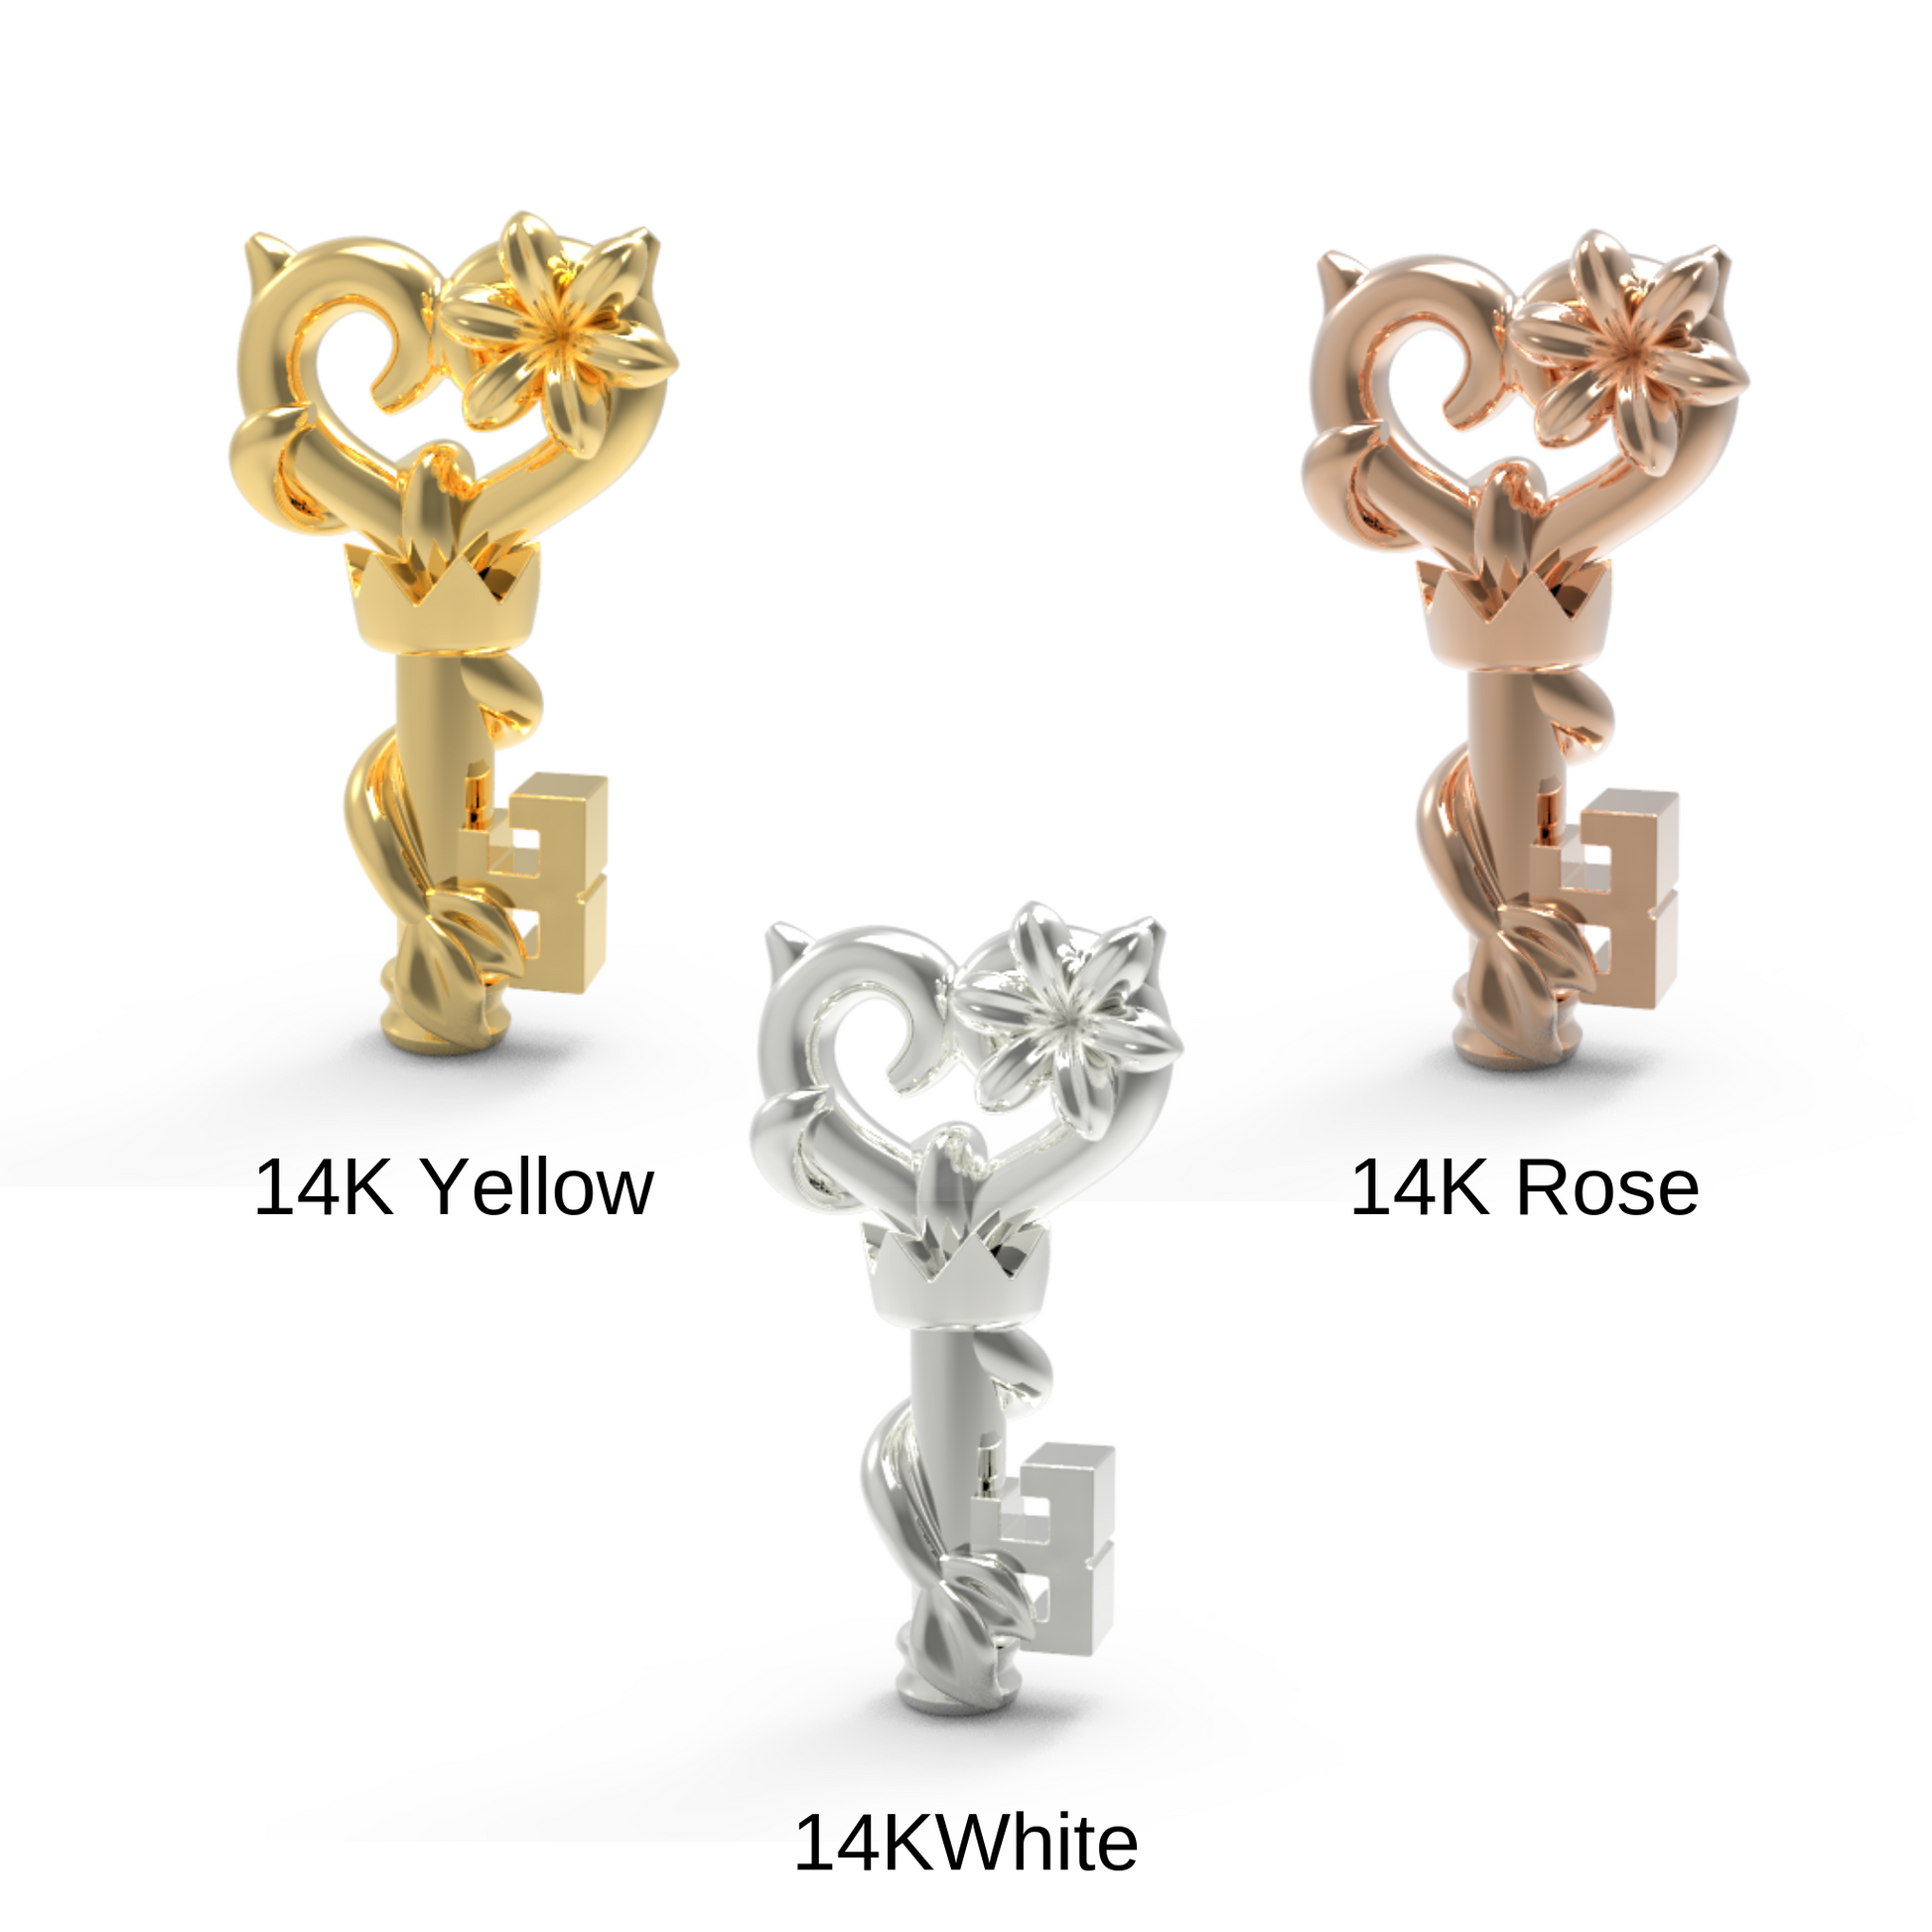 14k gold stud earrings in yellow, white and rose gold